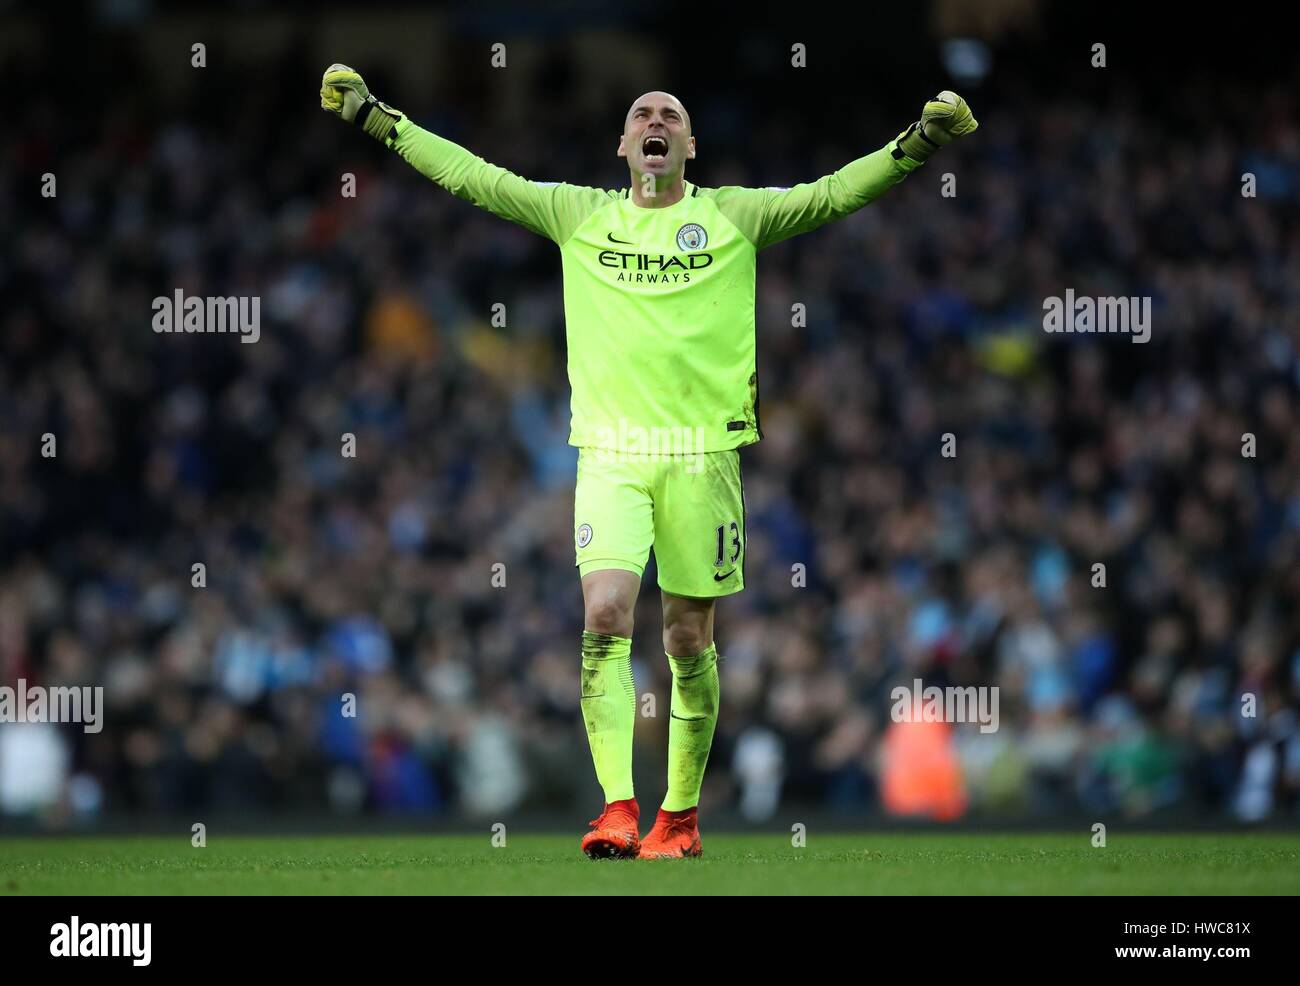 Manchester City goalkeeper Willy Caballero celebrates after Sergio Aguero scores his sides first goal of the game during the Premier League match at the Etihad Stadium, Manchester. Stock Photo